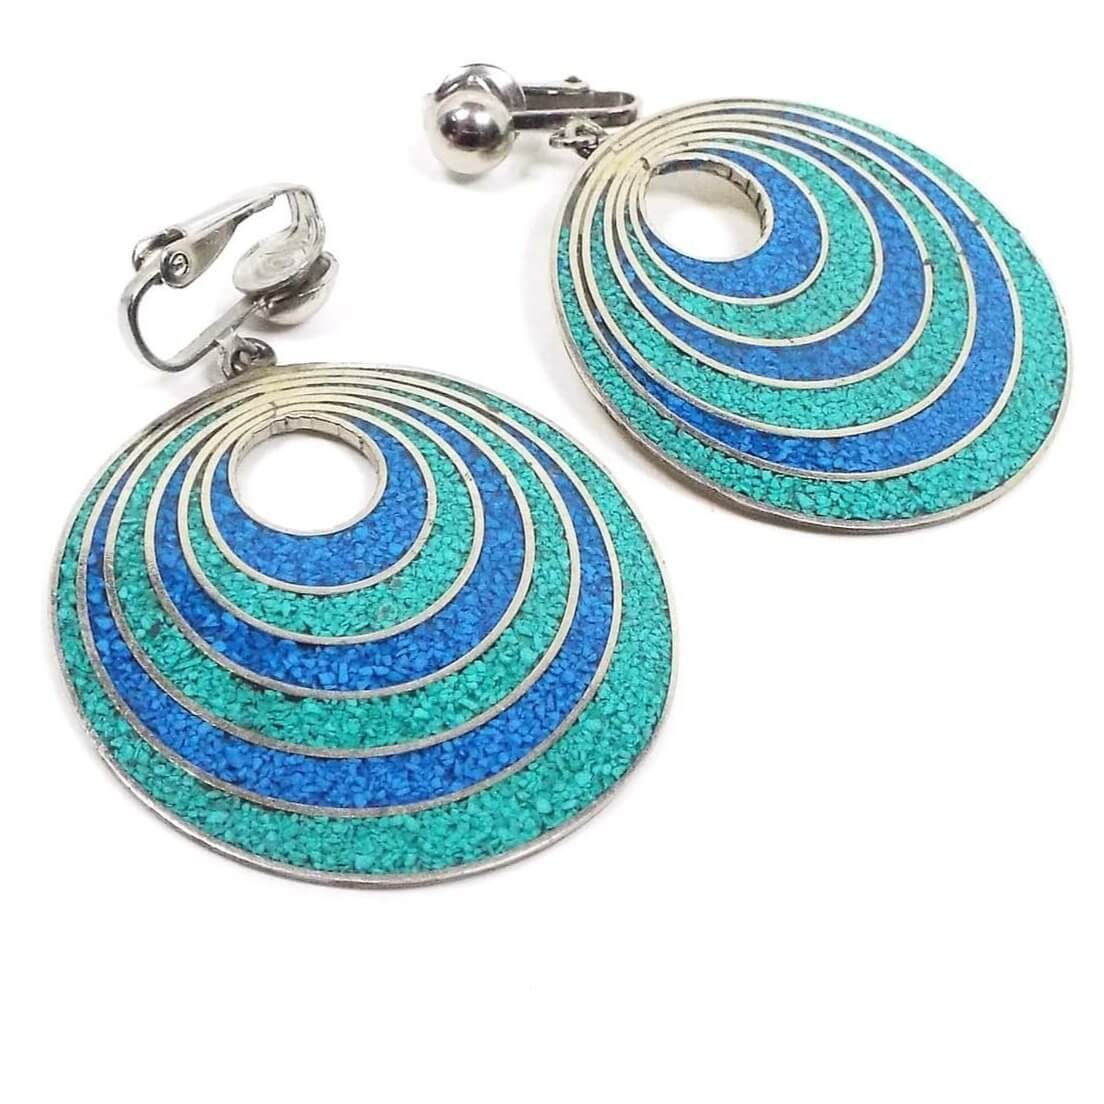 Front view of the retro vintage Mexican alpaca earrings. The metal is silver tone in color. There are clips at the top and large round drops at the bottom with a small round opening. There are rings of blue and green resin with tiny stone chips in them.